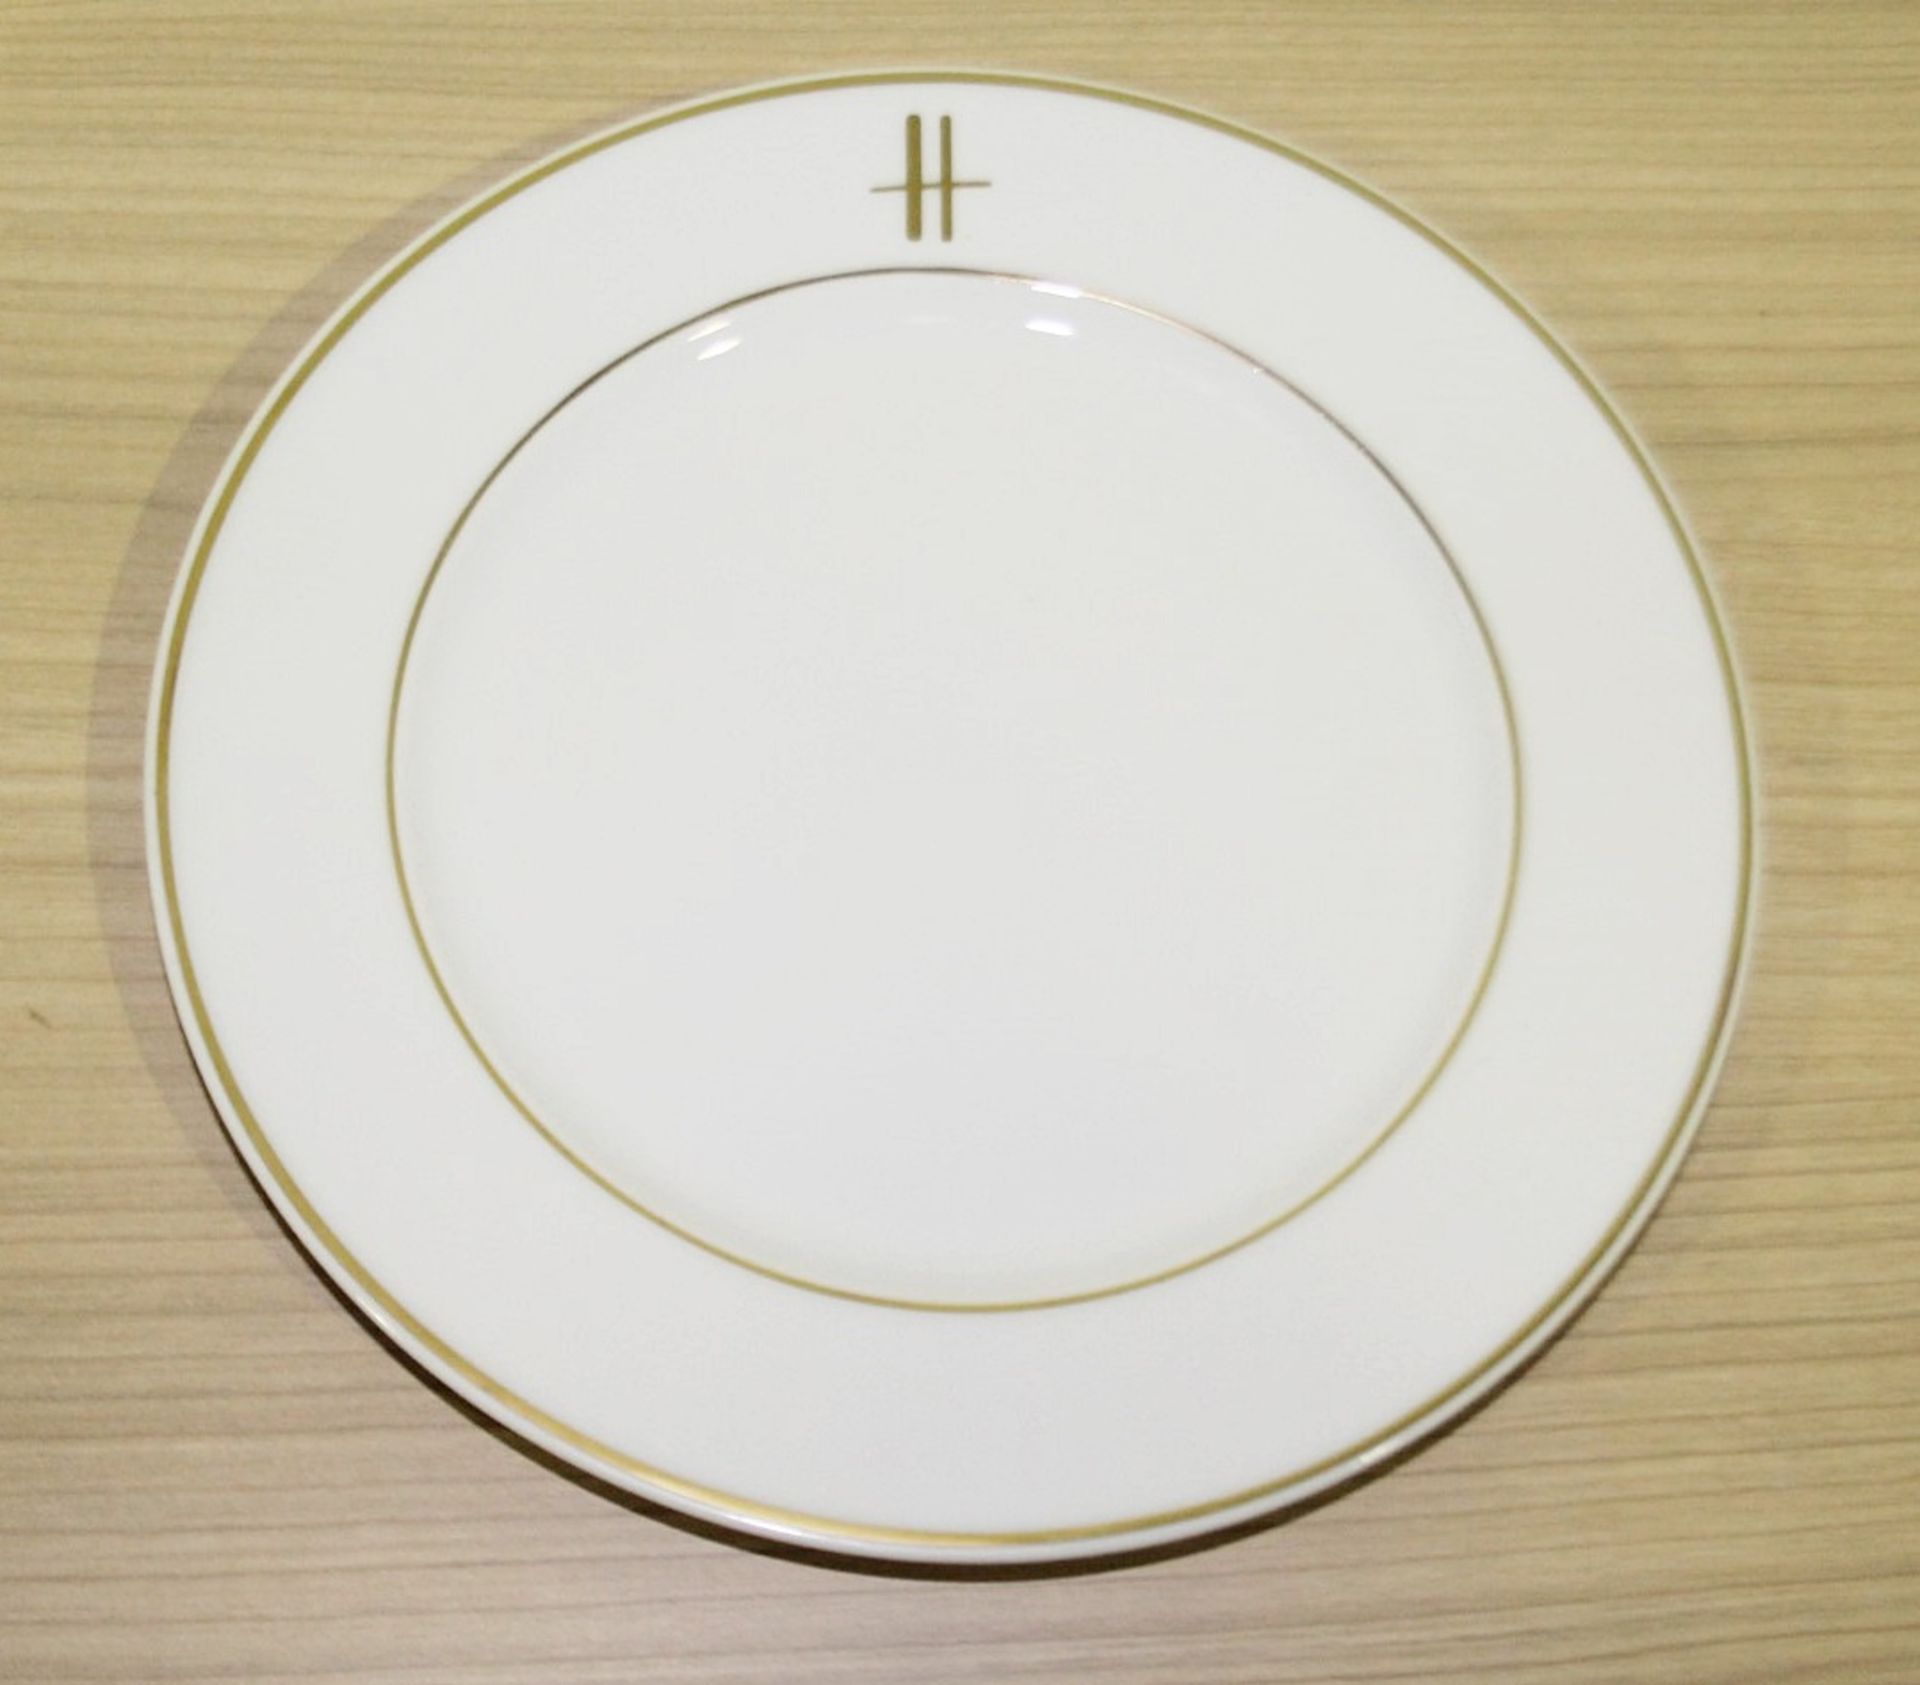 50 x PILLIVUYT Porcelain Side / Starter Plates In White Featuring 'Famous Branding' In Gold - Image 5 of 5